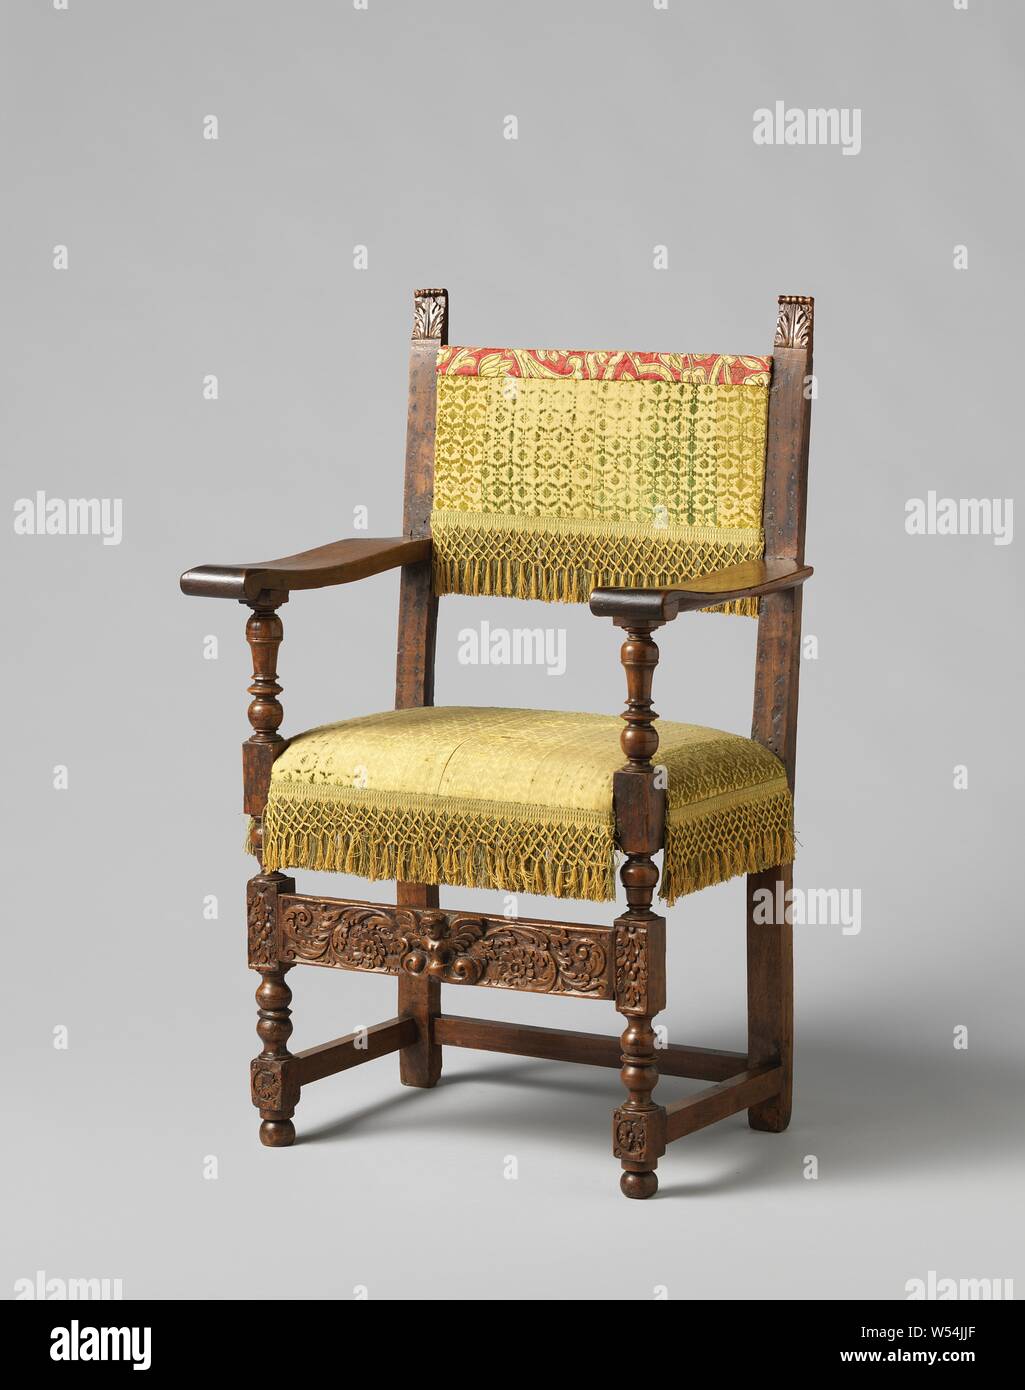 Armchair made of walnut, belonging to an furniture of four armchairs. The front legs and arm struts show house and articulation. The houses with leaf motifs are connected by a flat front line with stung leaf vines, between which a winged female figure whose abdomen changes into committed volutes. The wide, slightly hollowed flat armrests end in closed leaf forms. The back styles end in inserted leaf forms. The original damask upholstery is covered with antique fabric from a chasuble., anonymous, Spain (possibly), 1585 - 1600, wood (plant material), walnut (hardwood), textile materials, damask Stock Photo